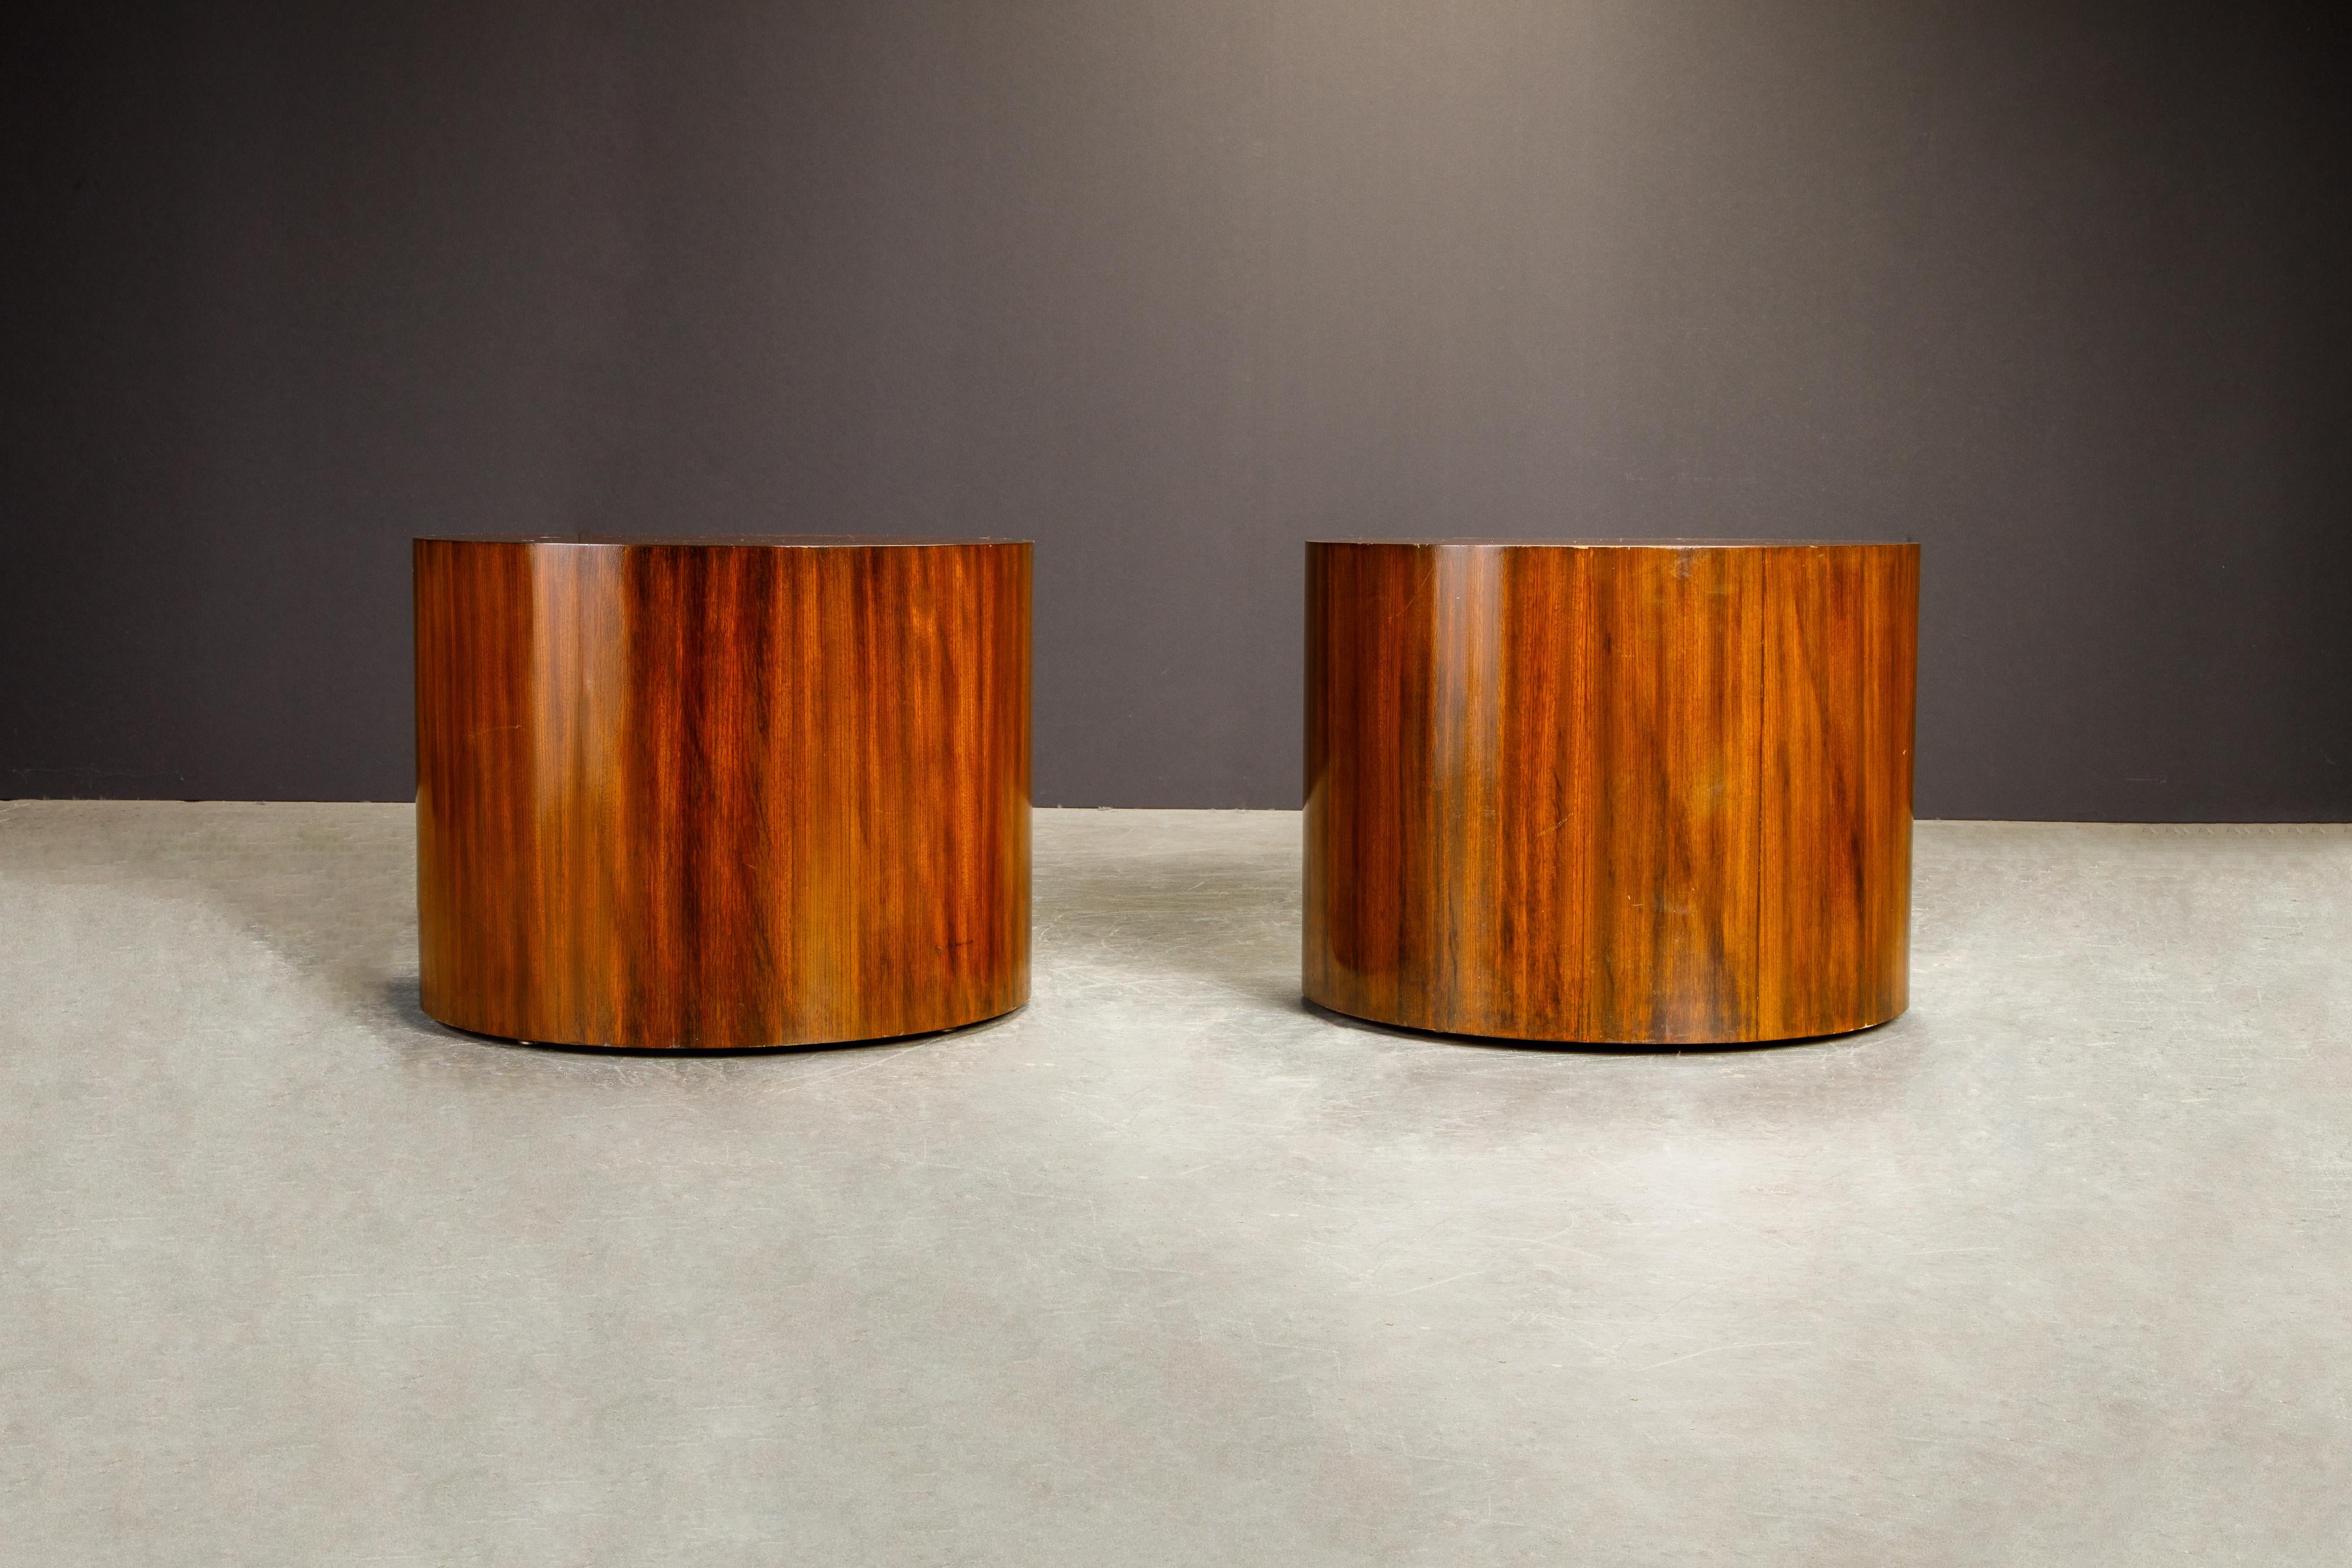 A pair of charming drum form wood tables in the style of Milo Baughman, circa 1970s, great as side tables, end tables, occasional tables or pedestals for sculptures. 

These cylinder pedestals / occasional tables would work great in a Mid-Century